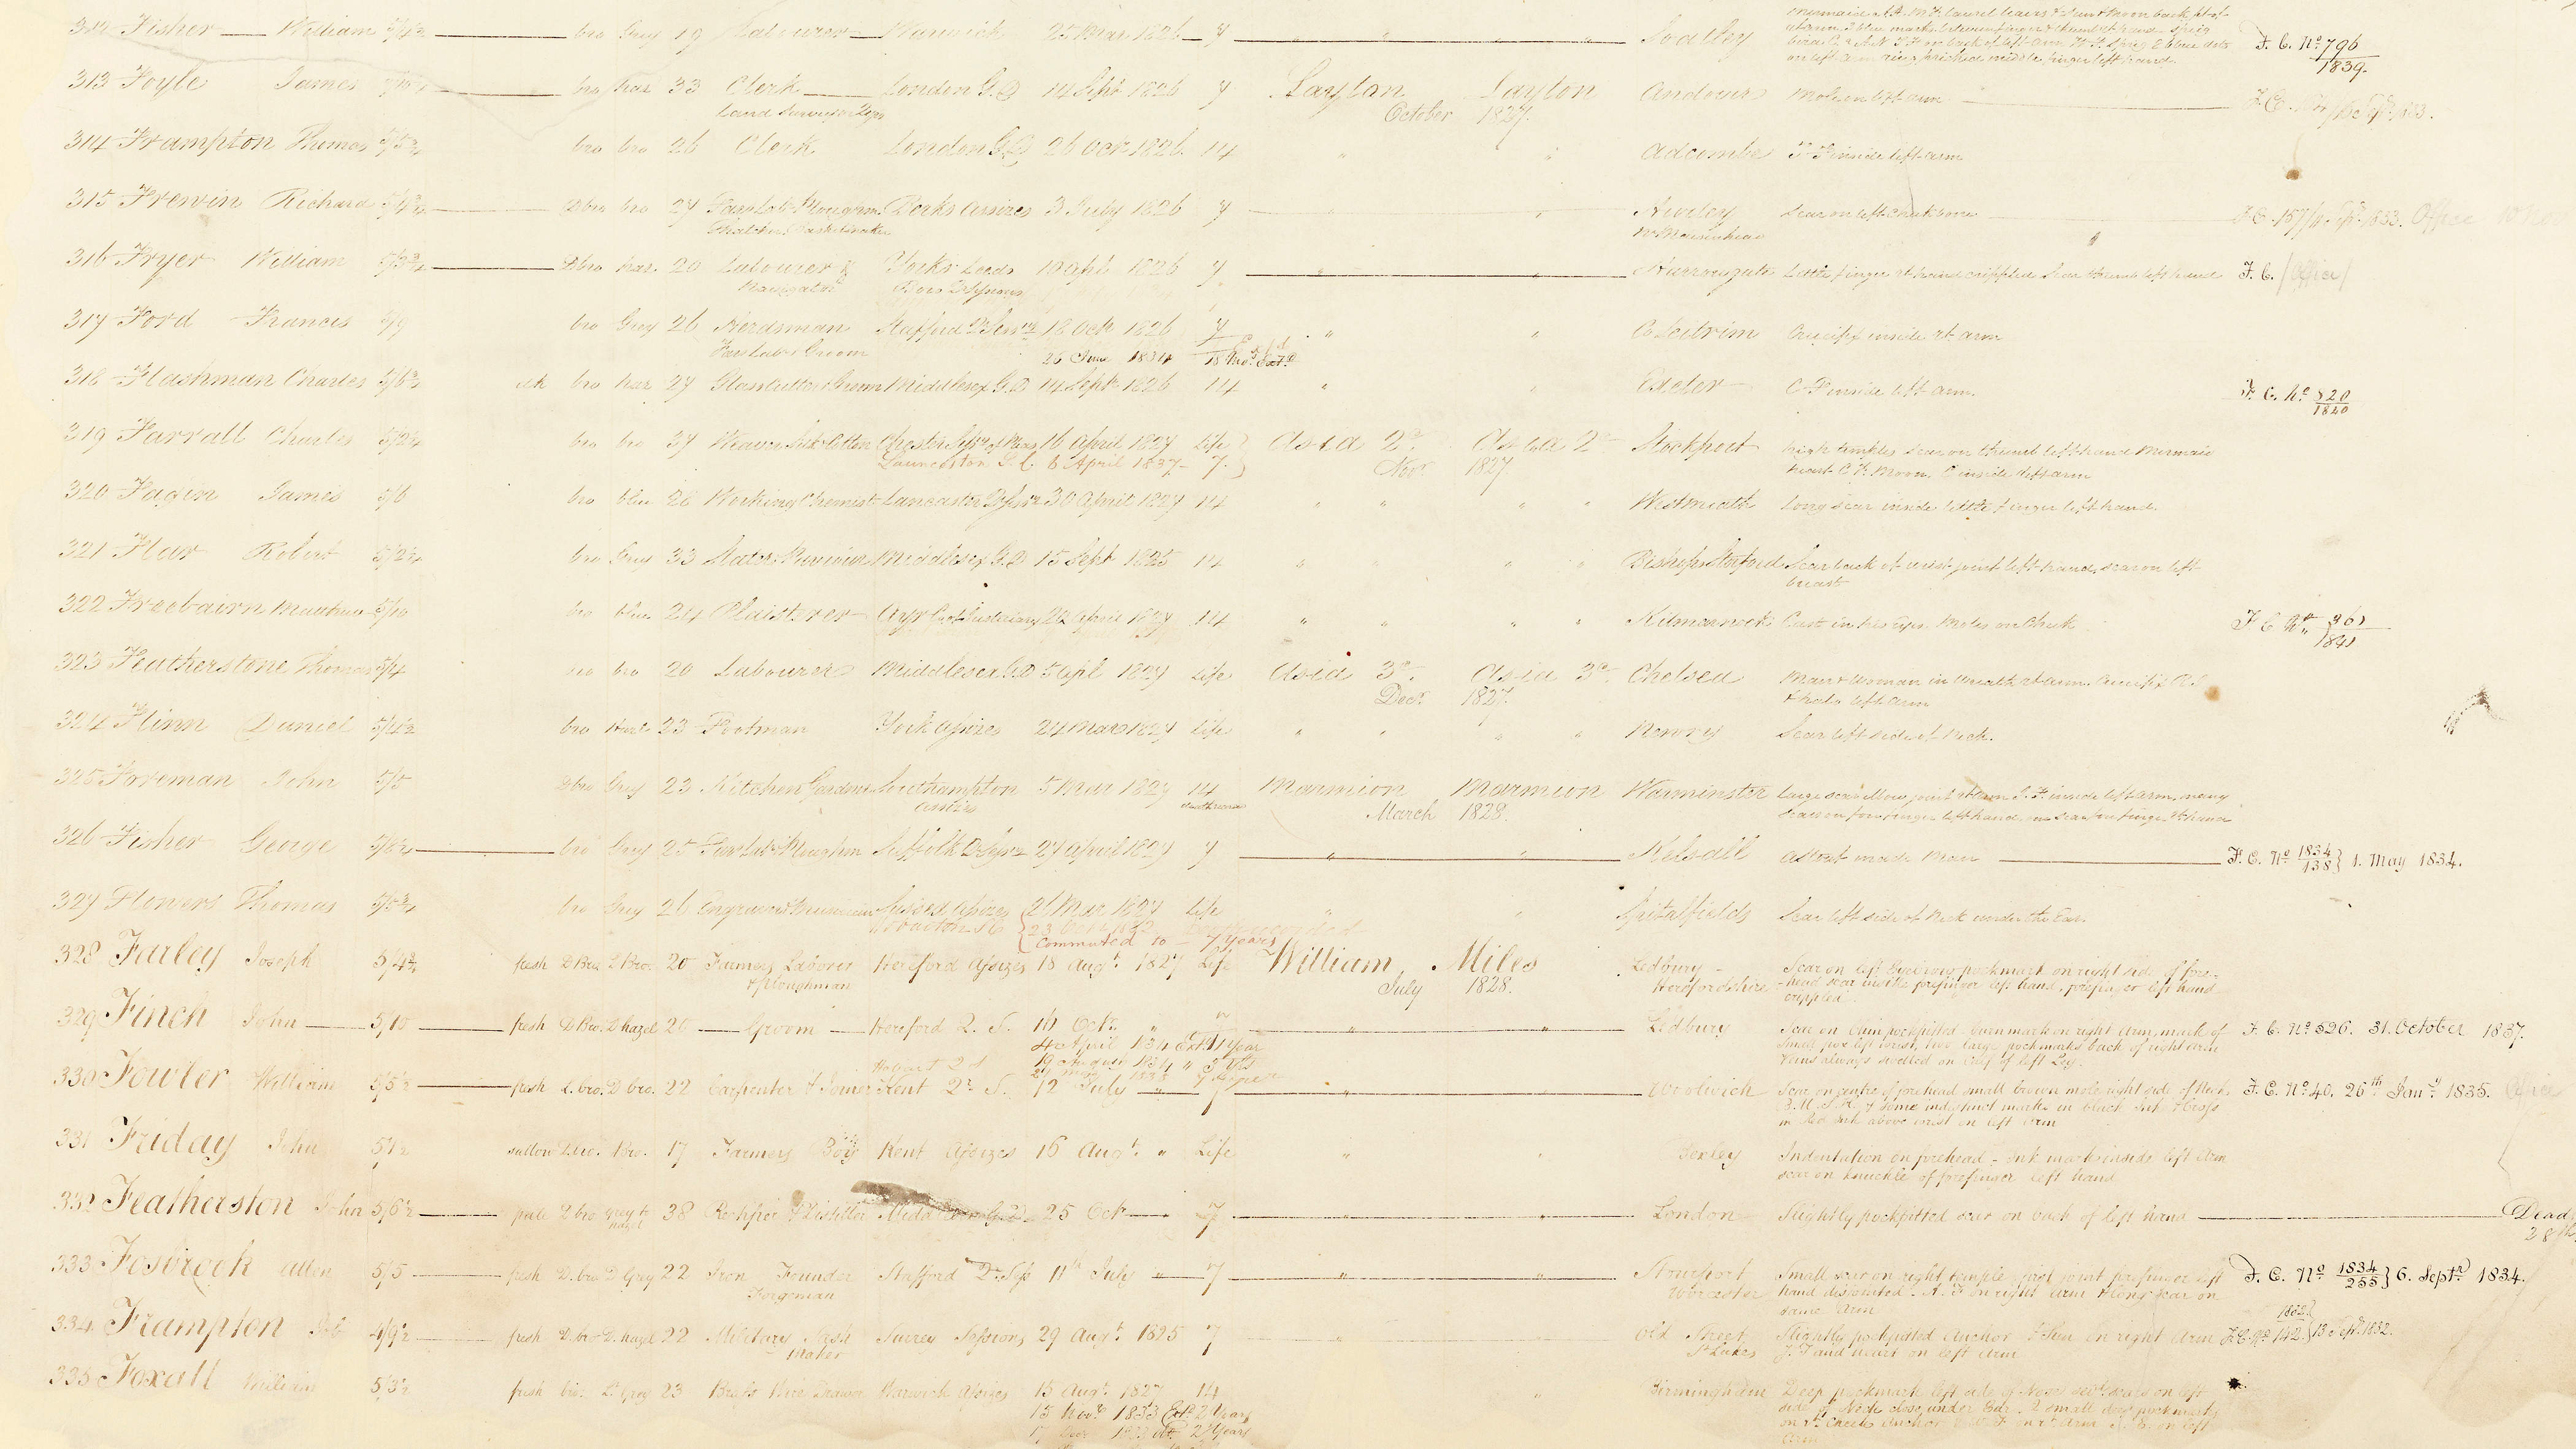 Excerpt from ledgers held as part of Brickendon Estate’s archives mentioning Joseph Farley.